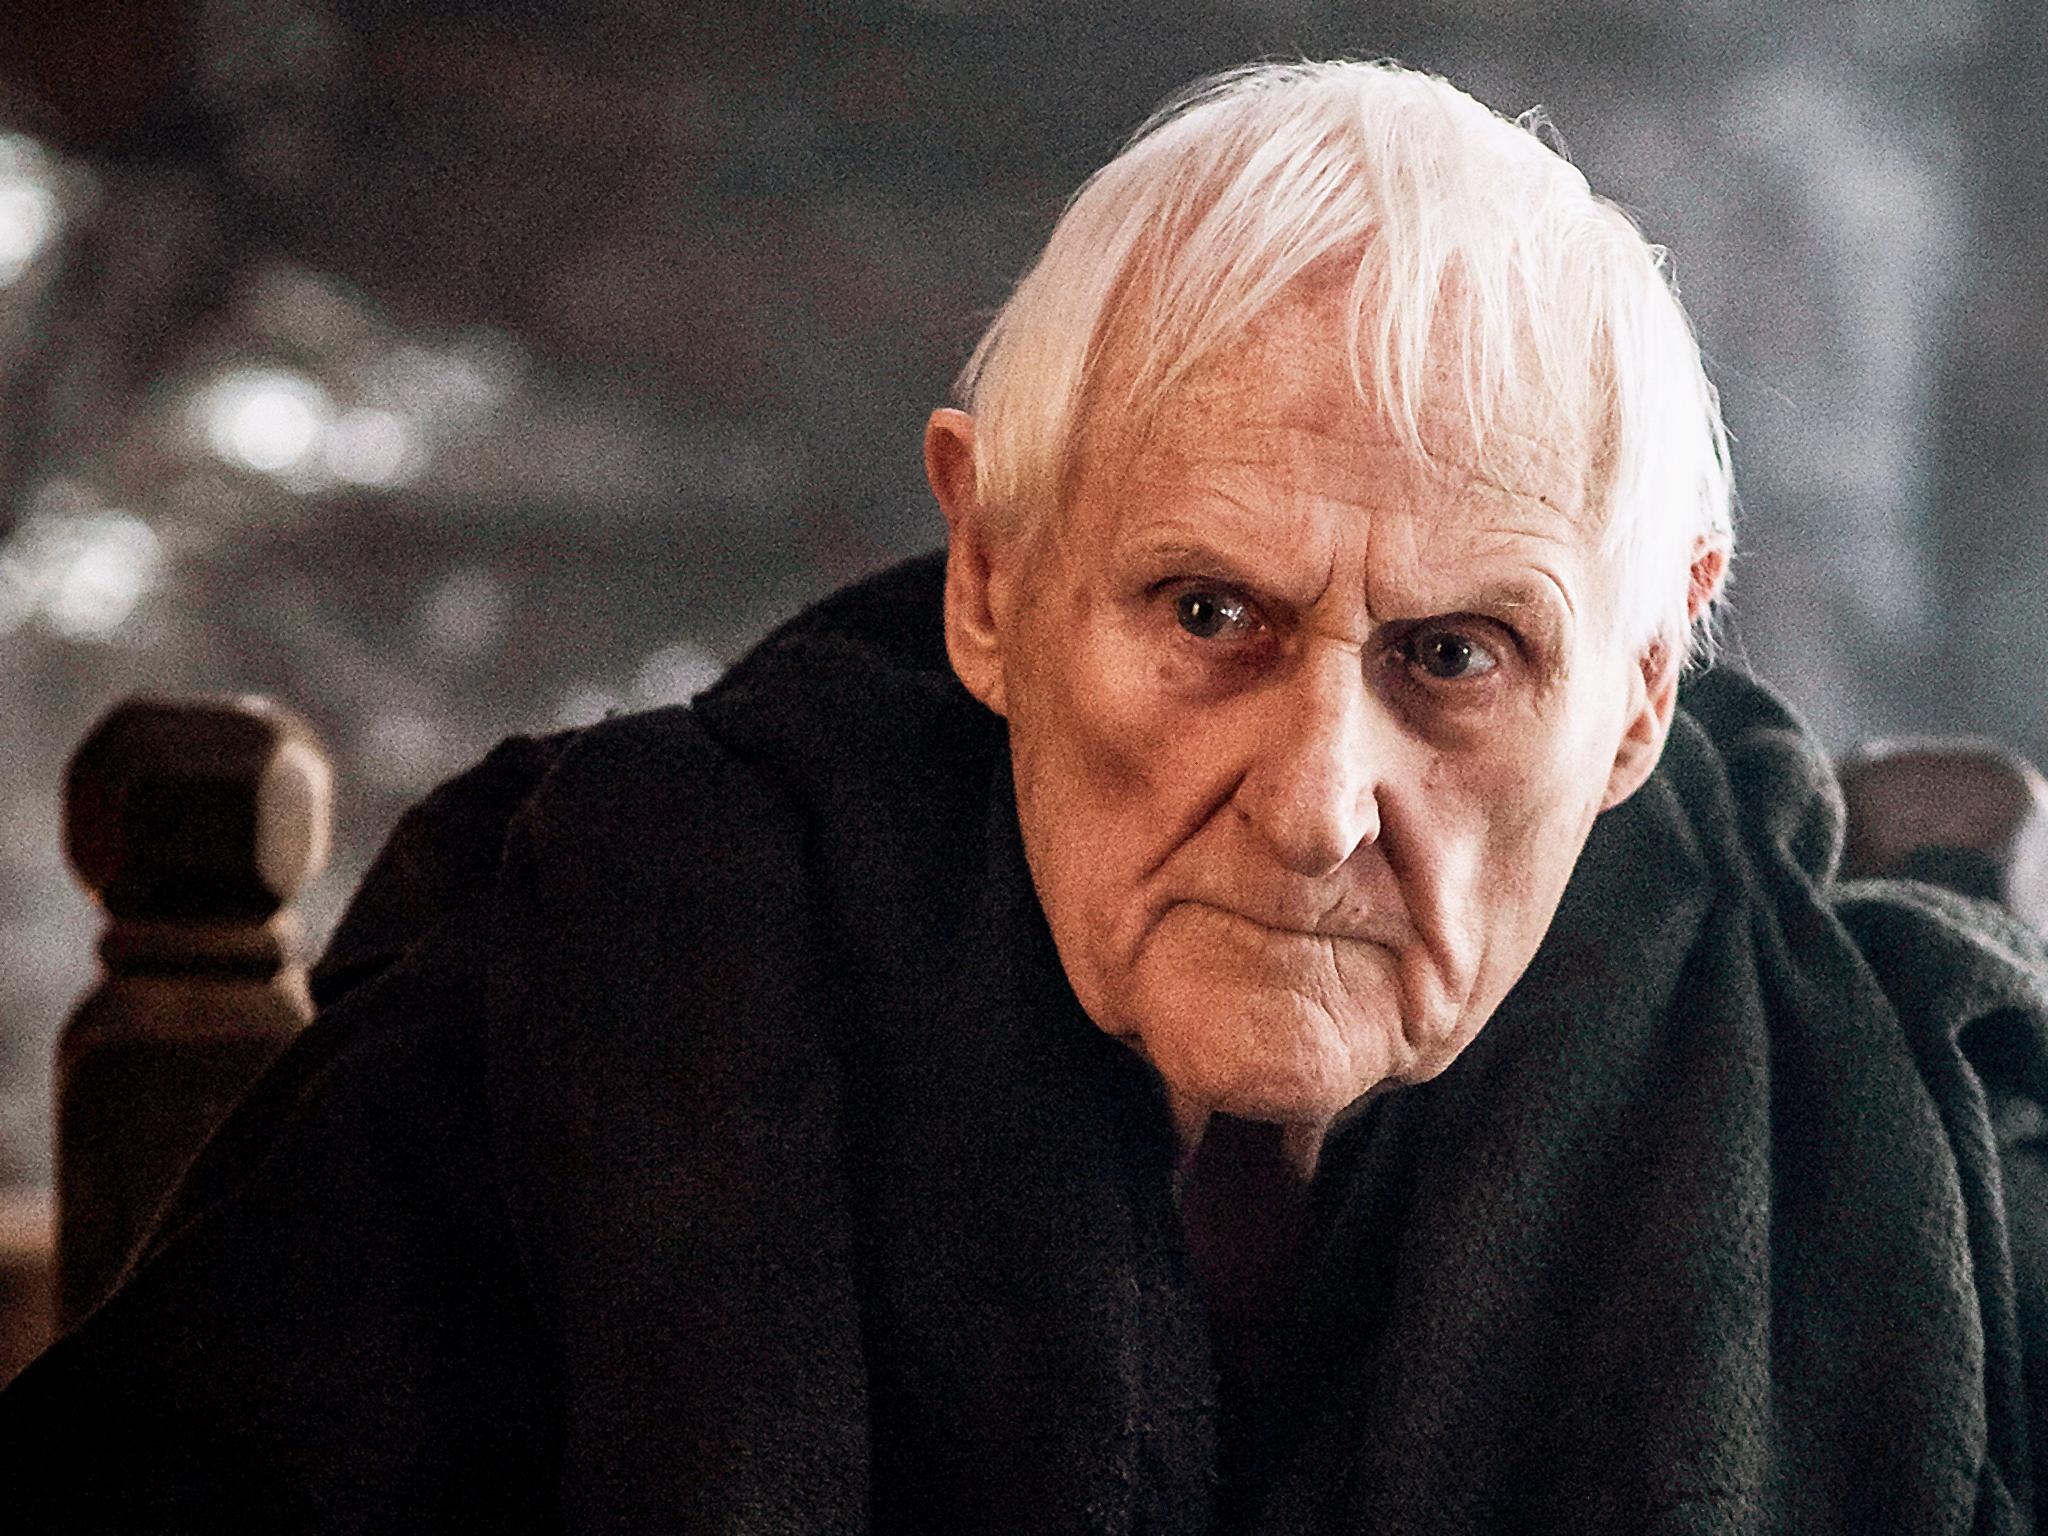 The veteran actor won a new generation of fans with his portrayal of Maester Aemon in 'Game of Thrones'